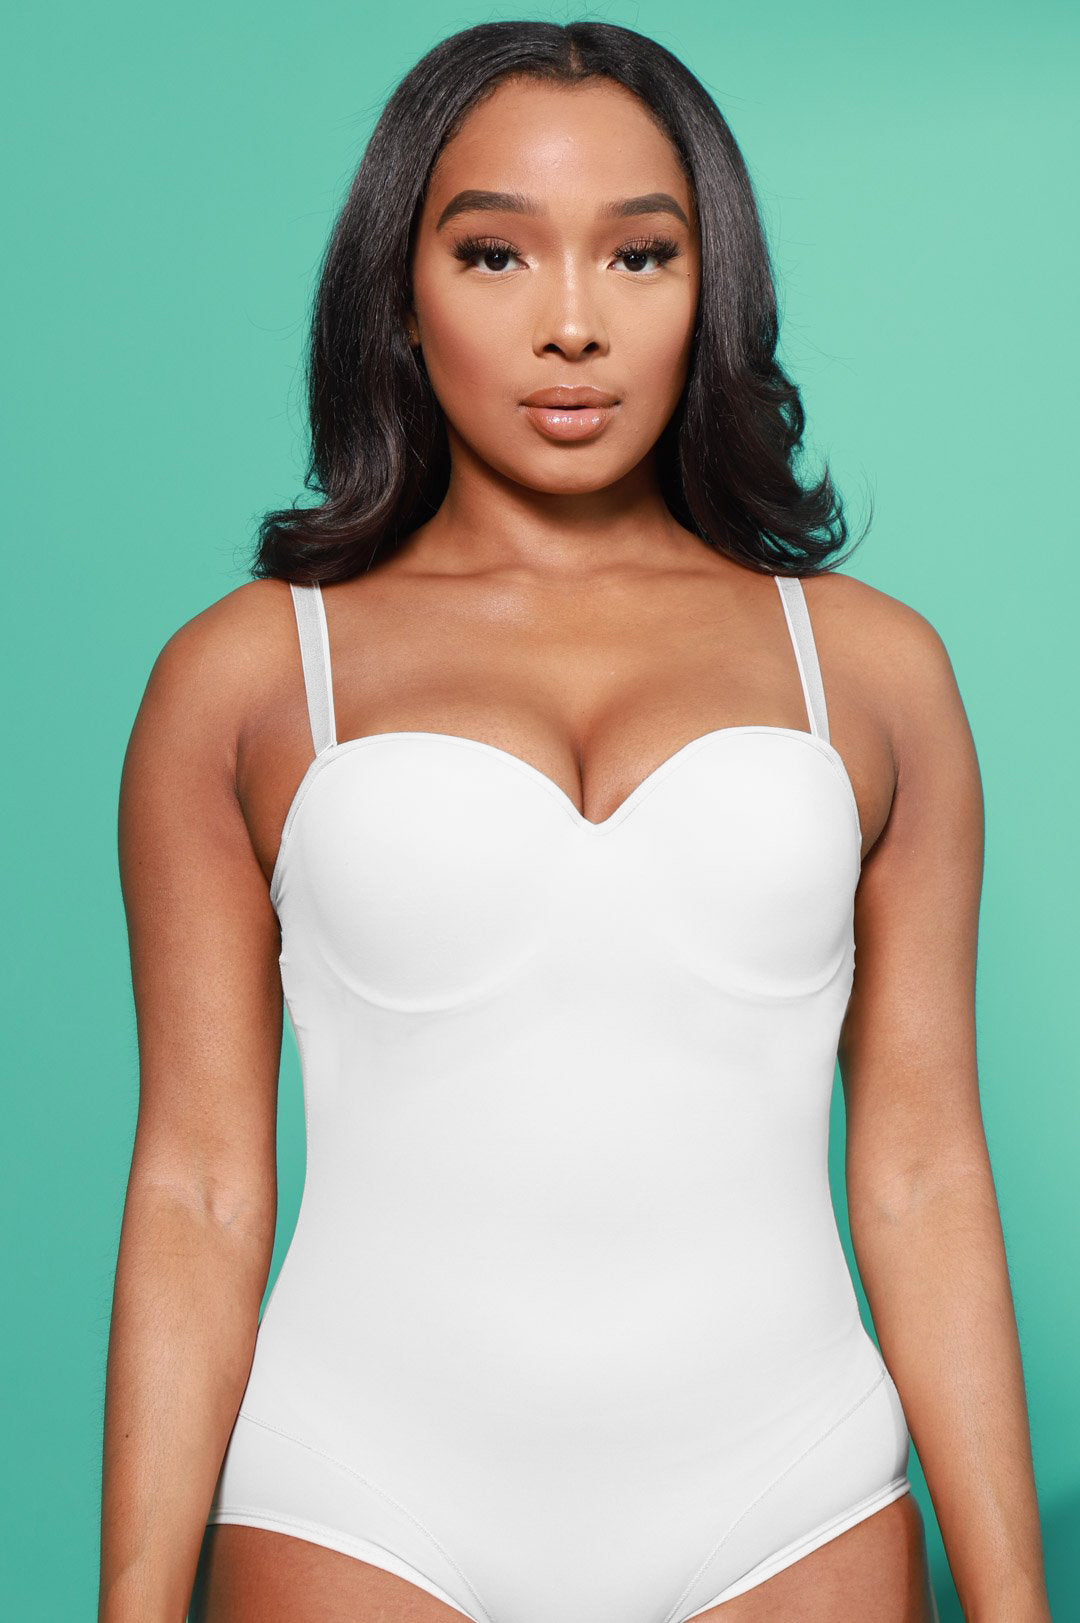 My Posh Everything Fashion - Flex Long Sleeve String Bodysuit comes in 3  colors.(white,black, and tan S, M and L) Shop latest trends  www.posheverythingfashion.com